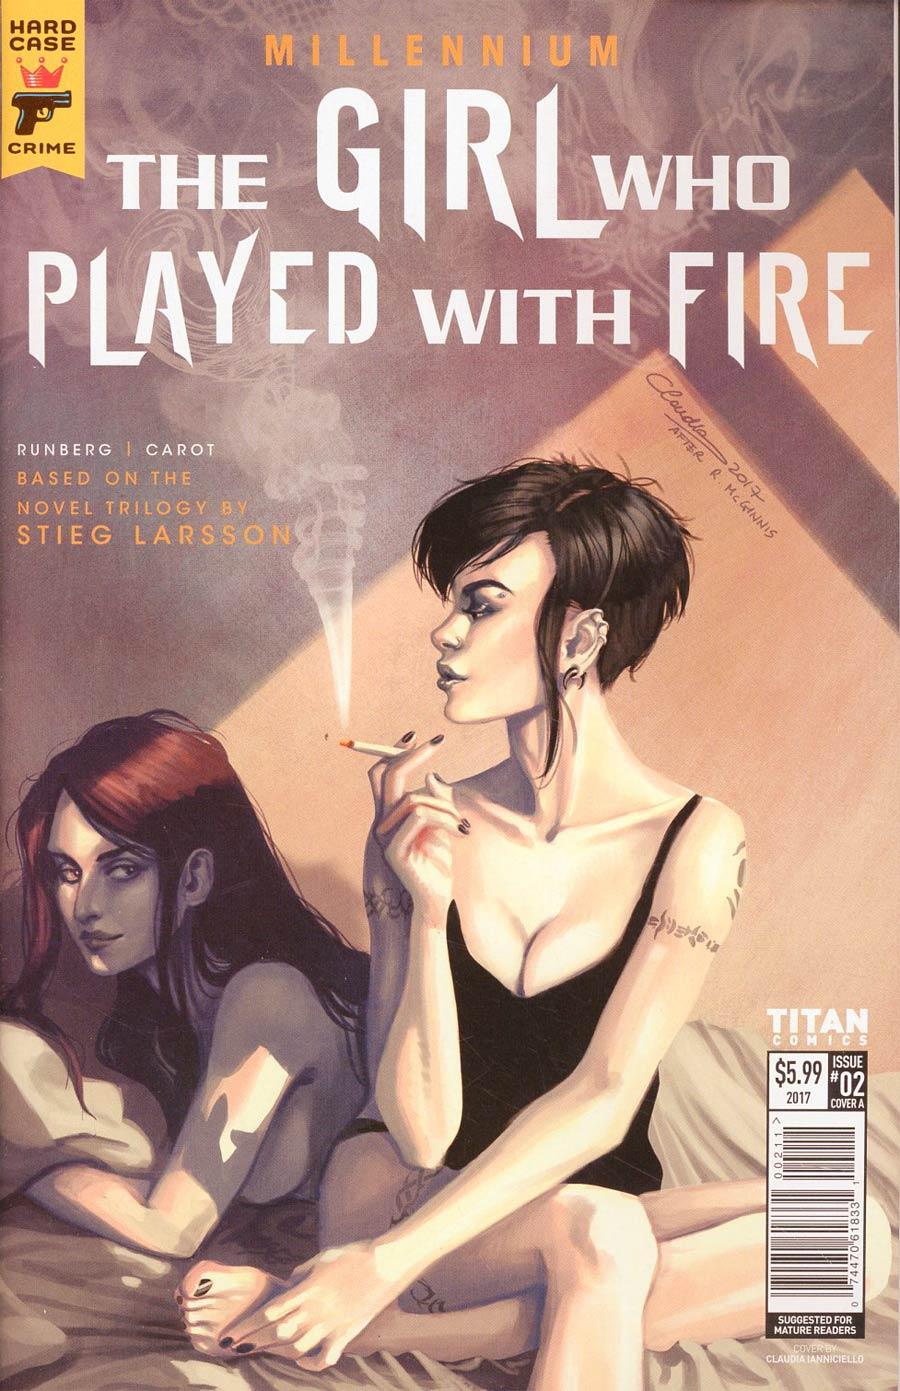 Hard Case Crime Millennium Girl Who Played With Fire Vol. 1 #2